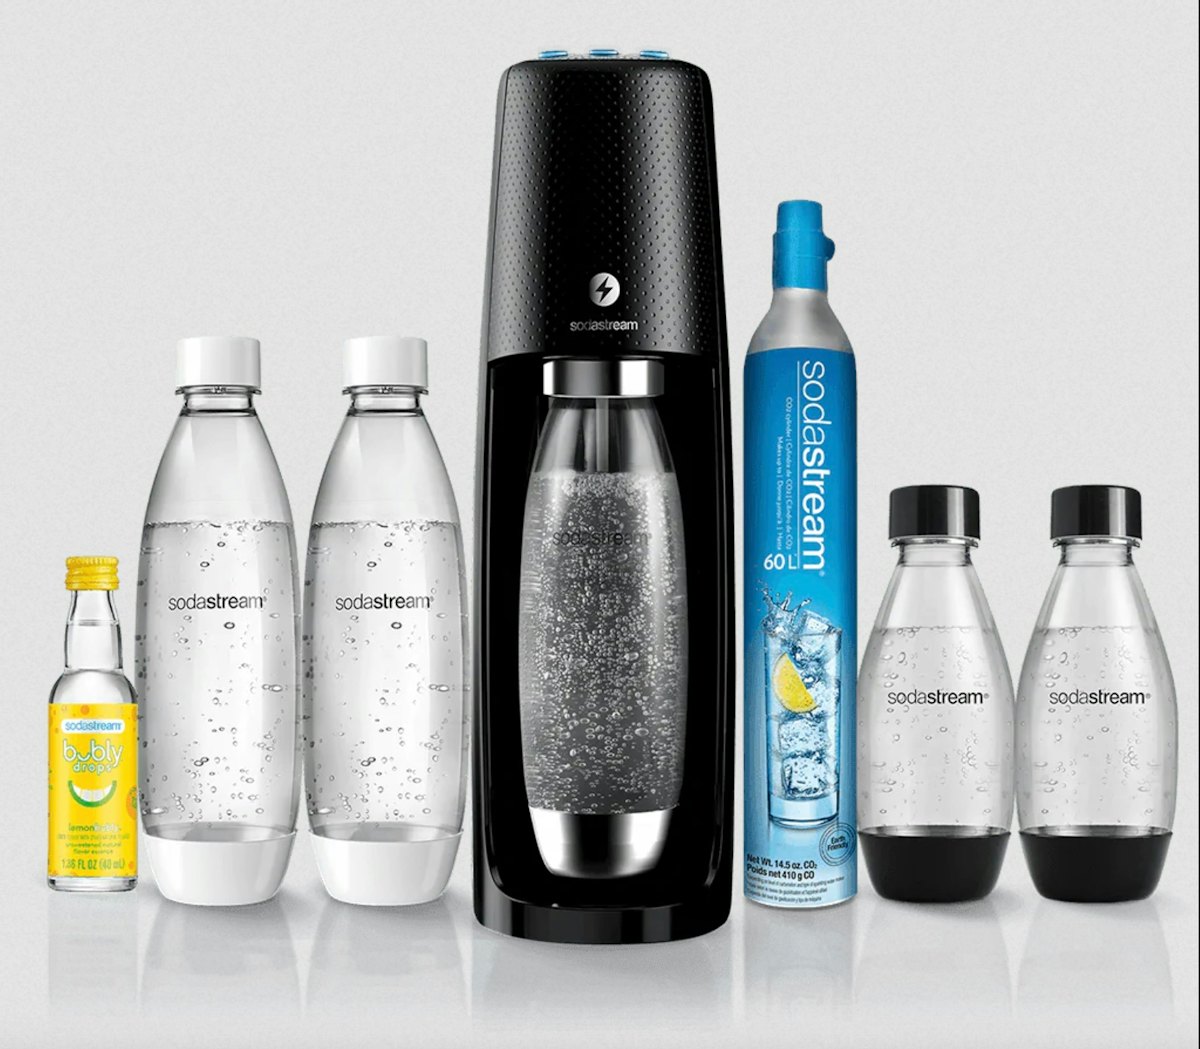 your next pepsi-cola could be DIY as pepsico buys sodastream in effort to  reduce waste